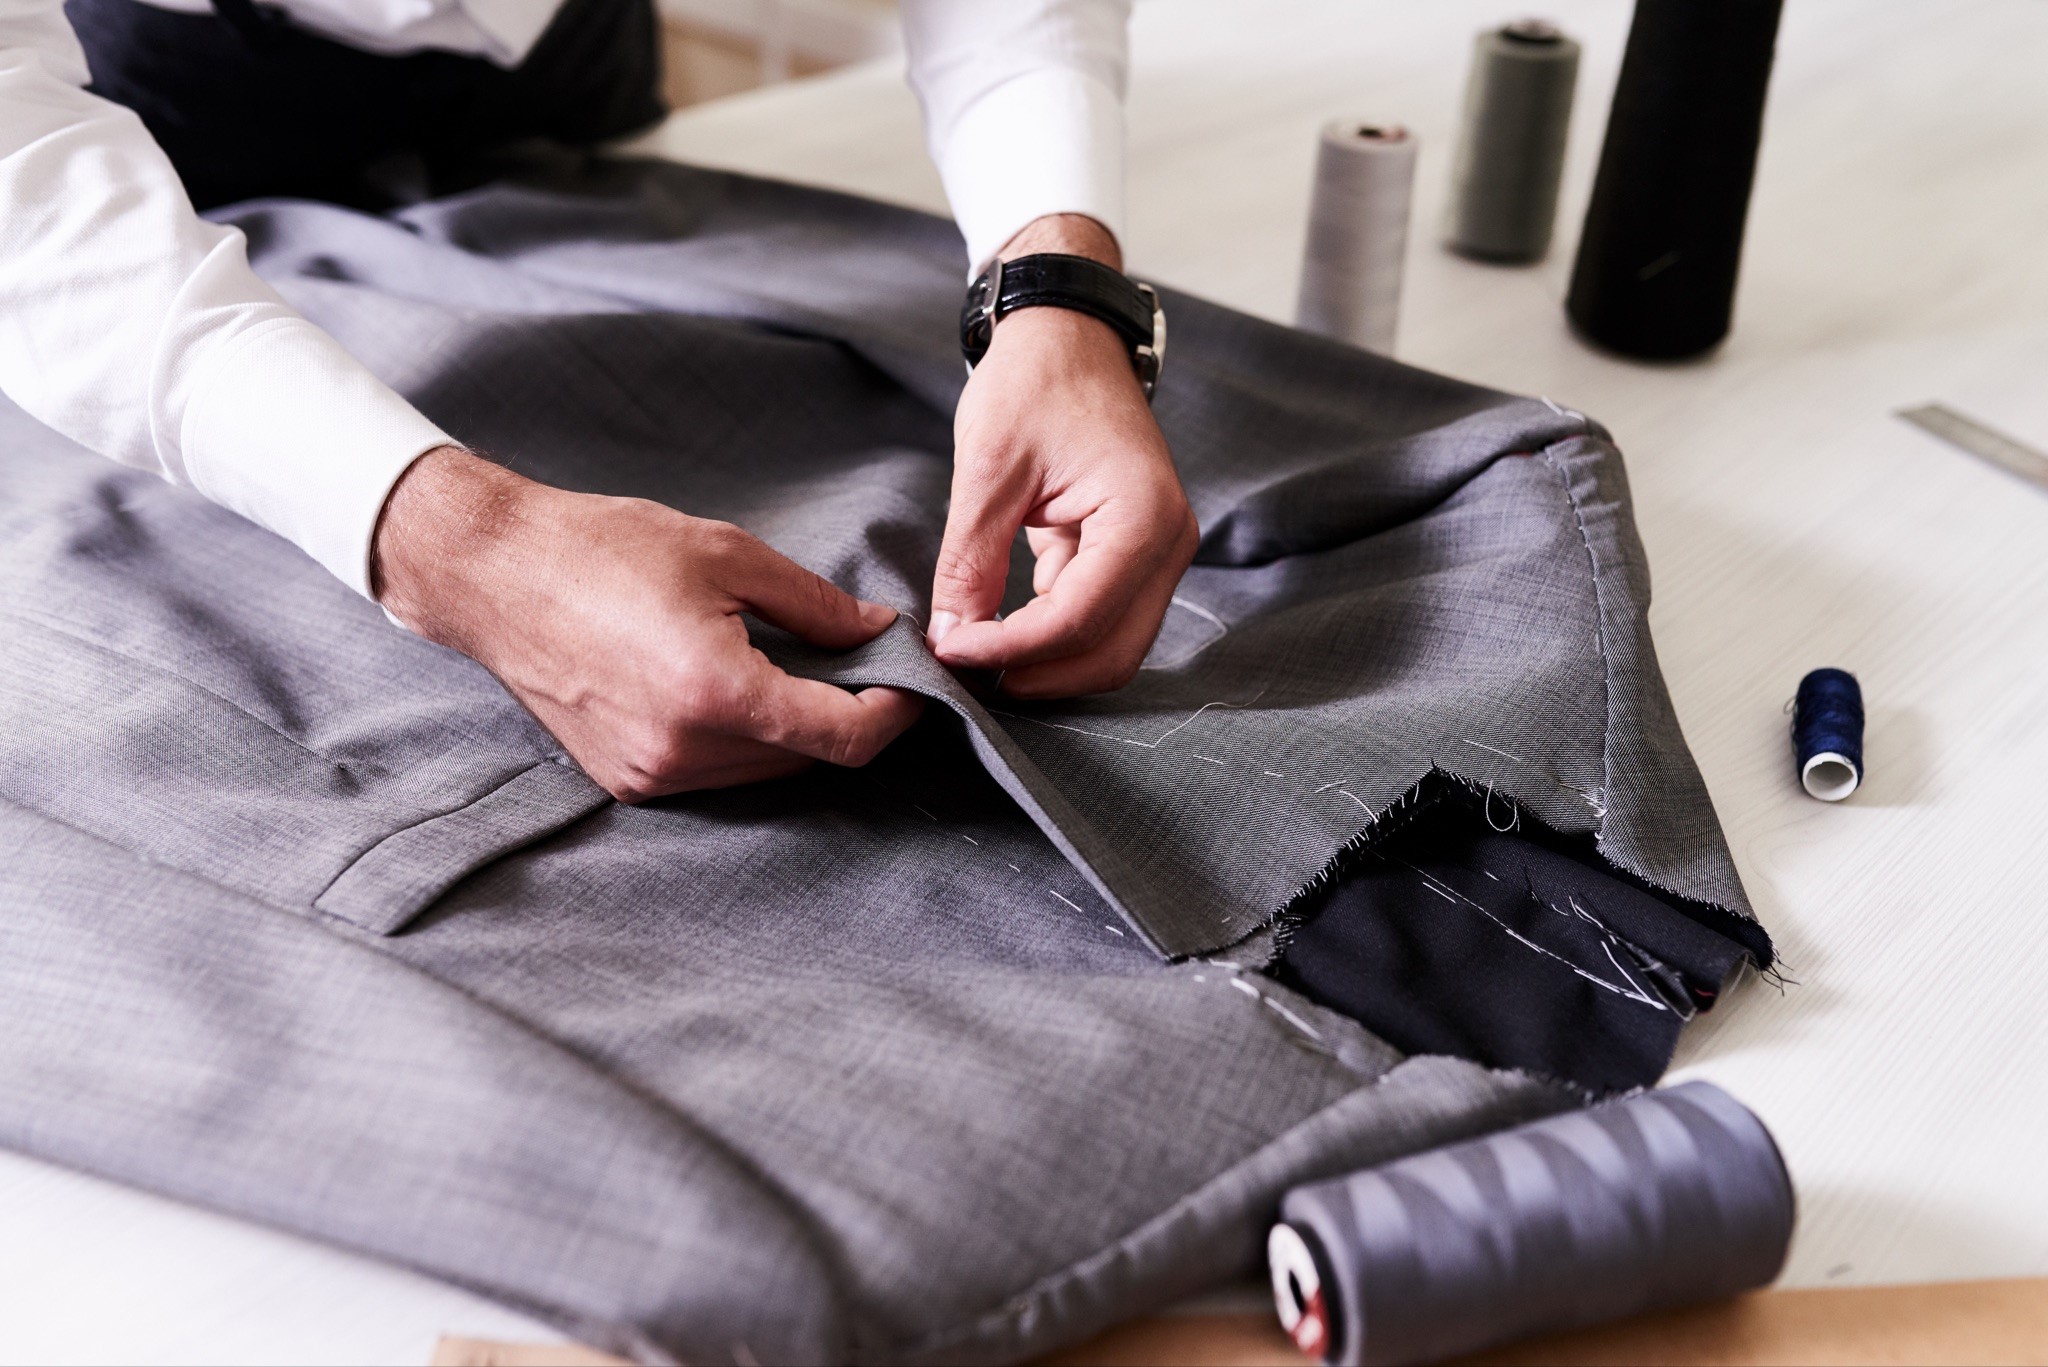 Tailoring Suits: 3 Things to Consider